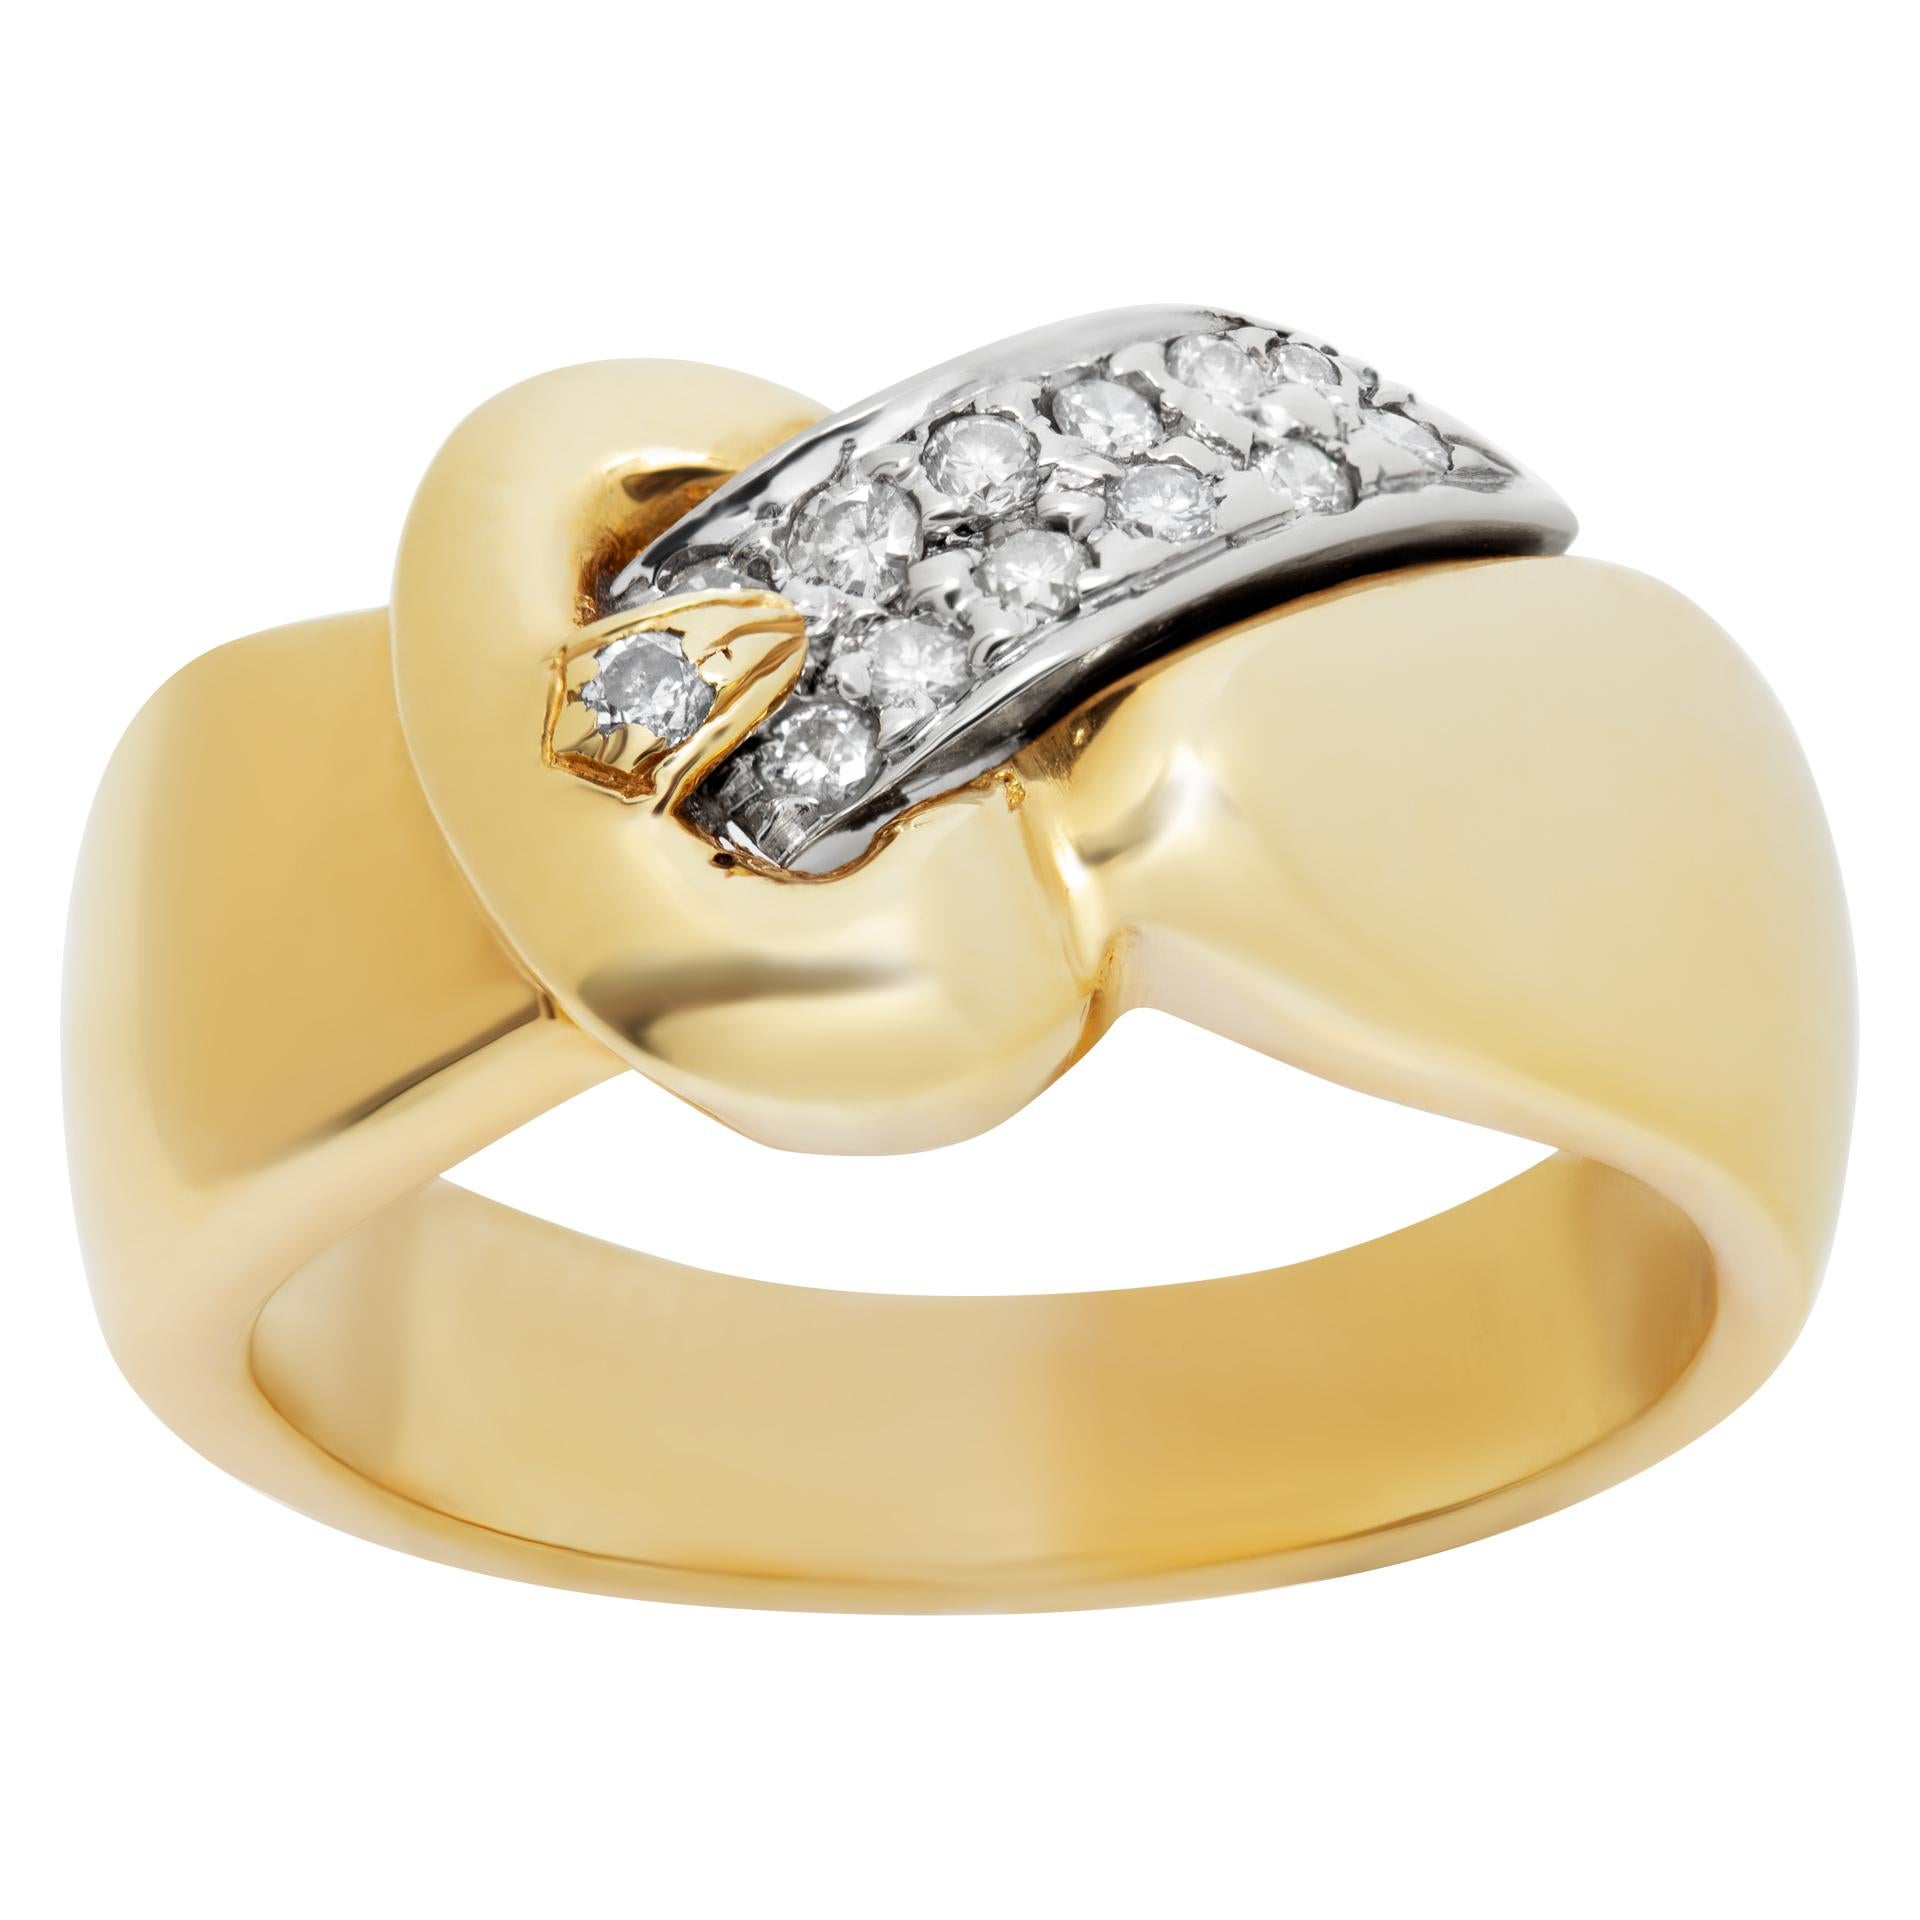 Buckle Ring in 18k Yellow Gold with Diamond Accents